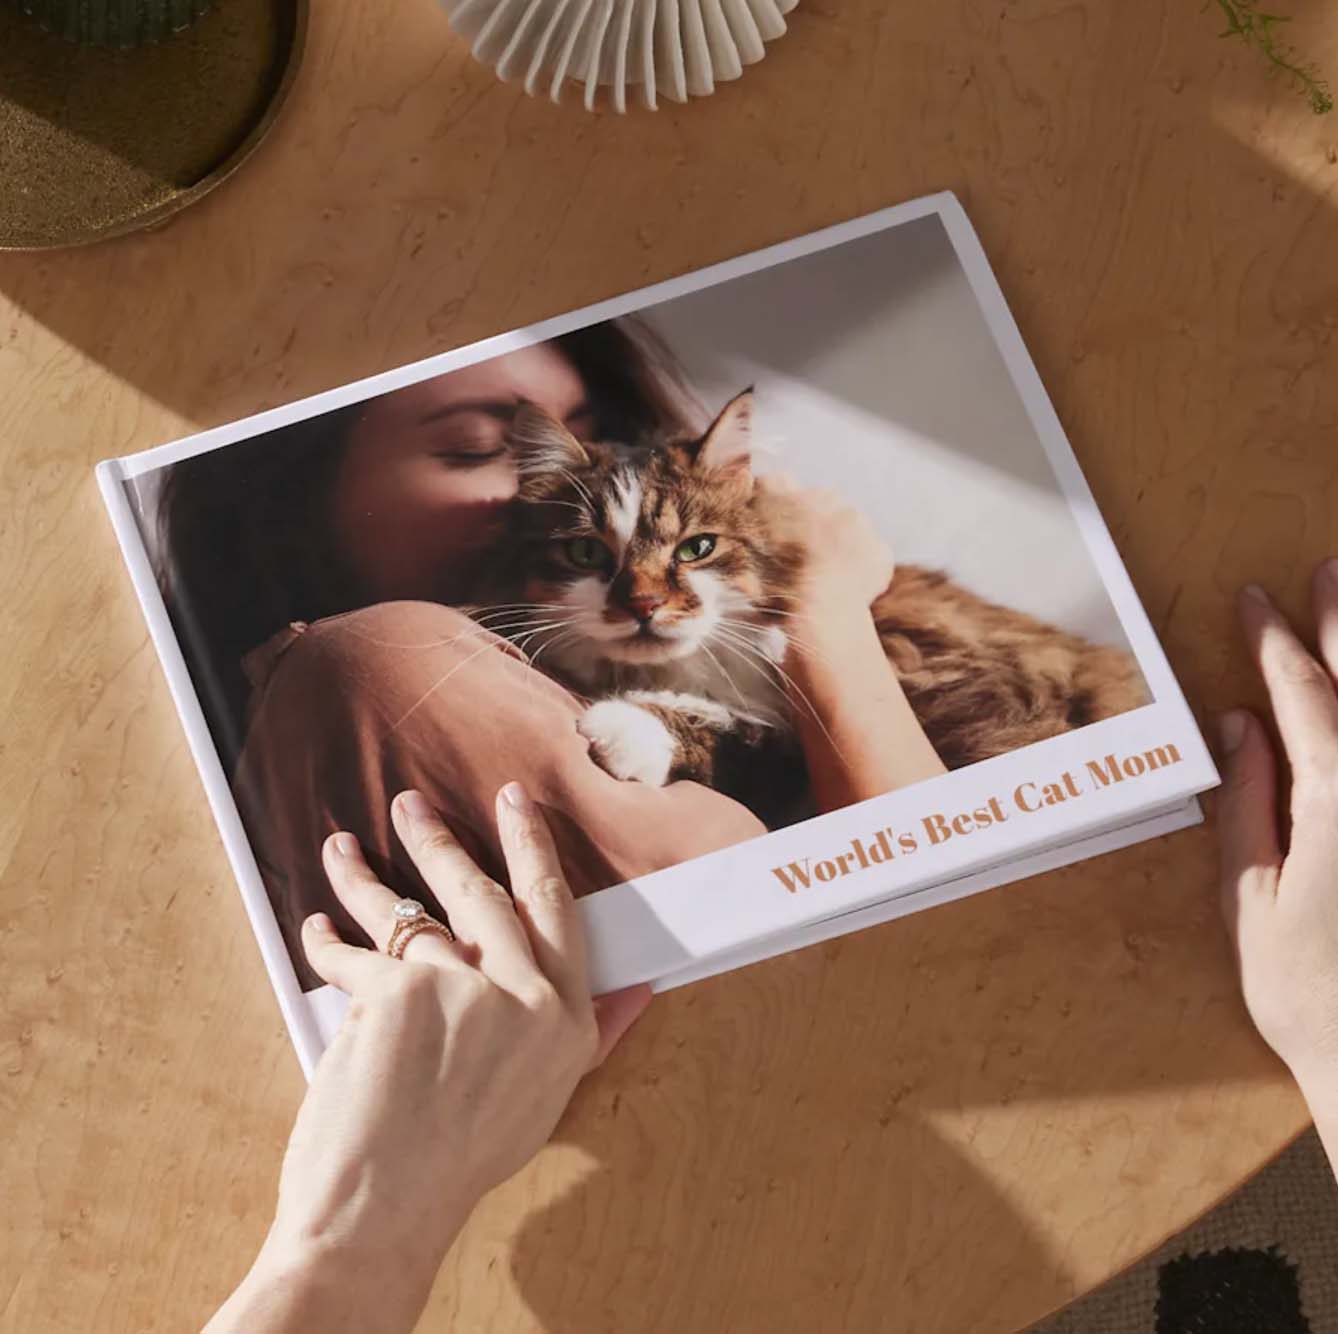 Hands touching a photobook with image of a woman and cat on the cover